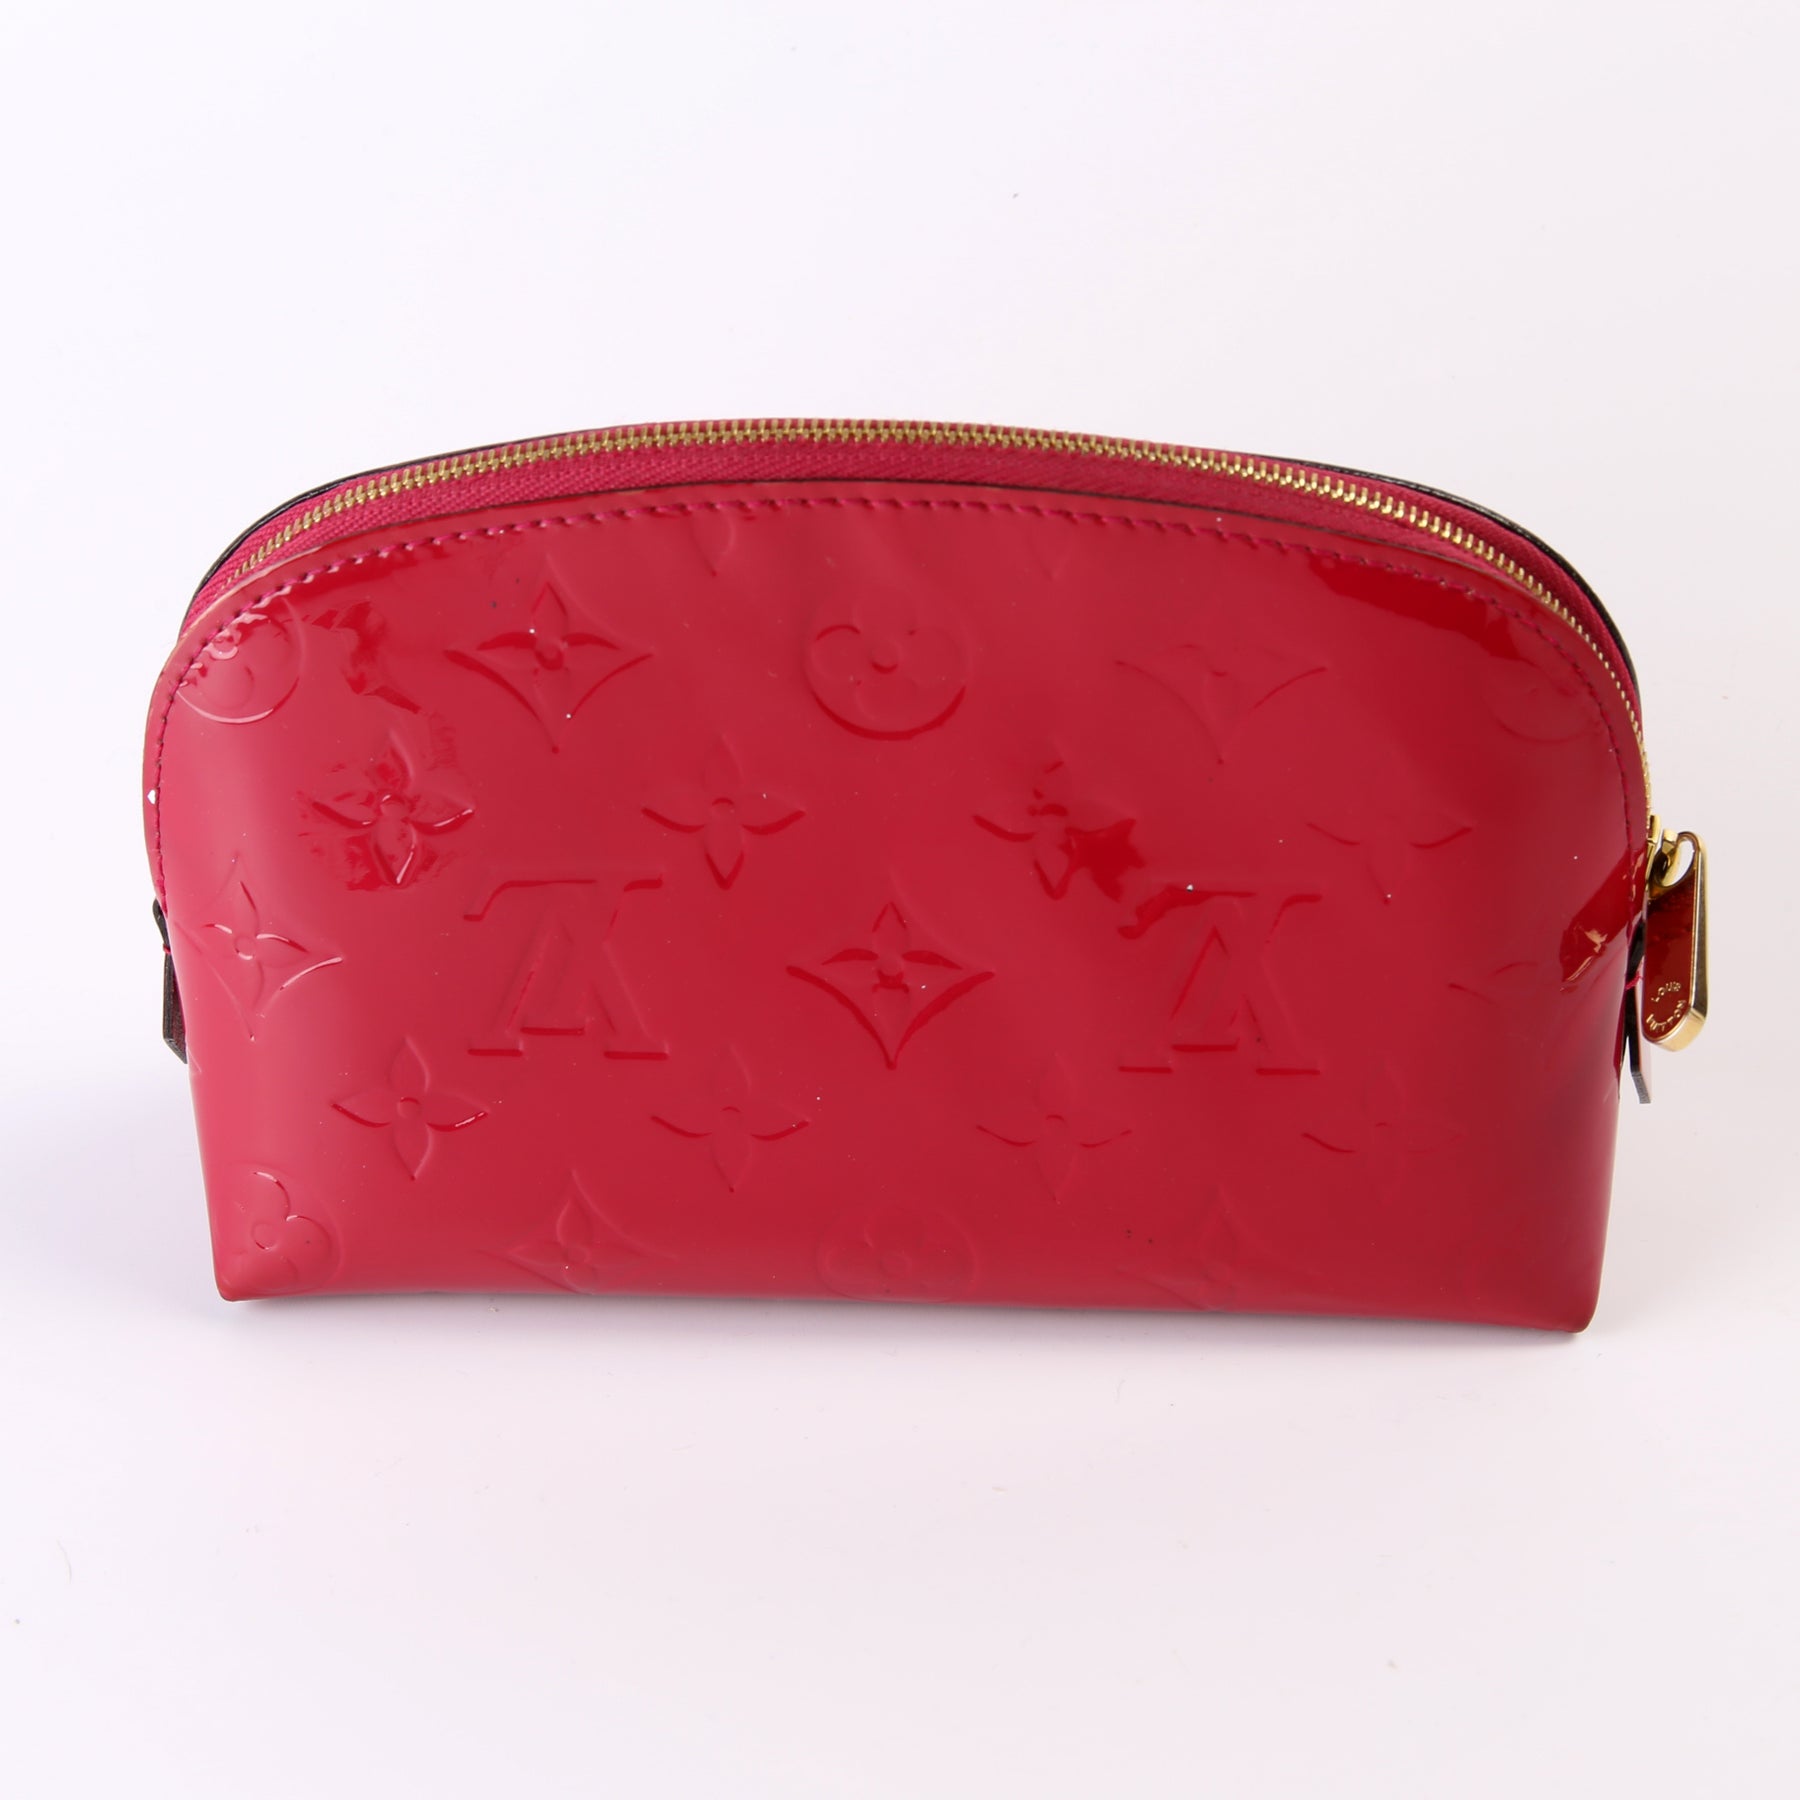 Louis Vuitton Vintage - Vernis Leather Cosmetic Pouch - Red